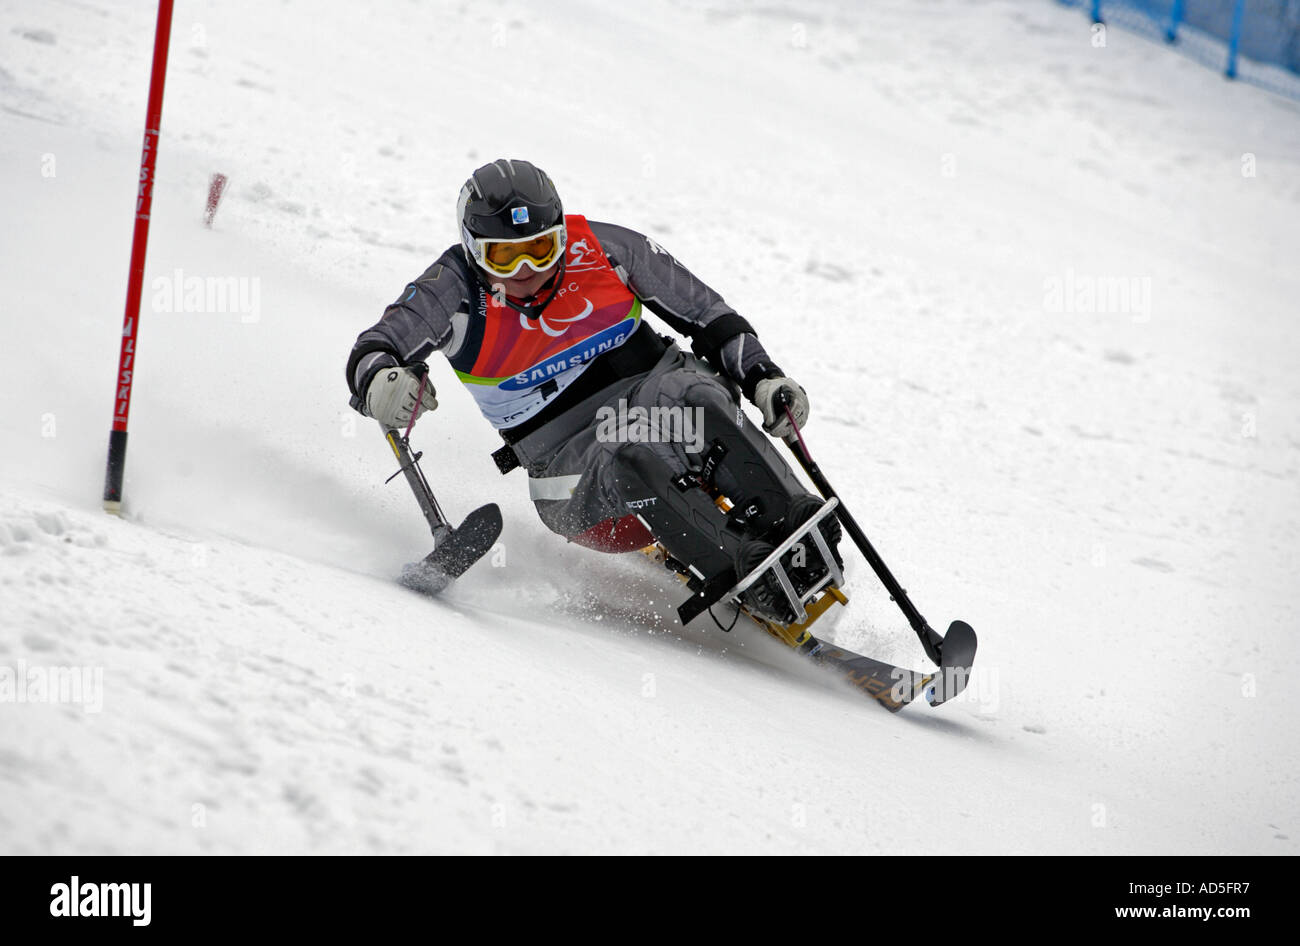 Tatsuko Aoki of Japan on her first run in the Womens Alpine Skiing Slalom Sitting competition Stock Photo